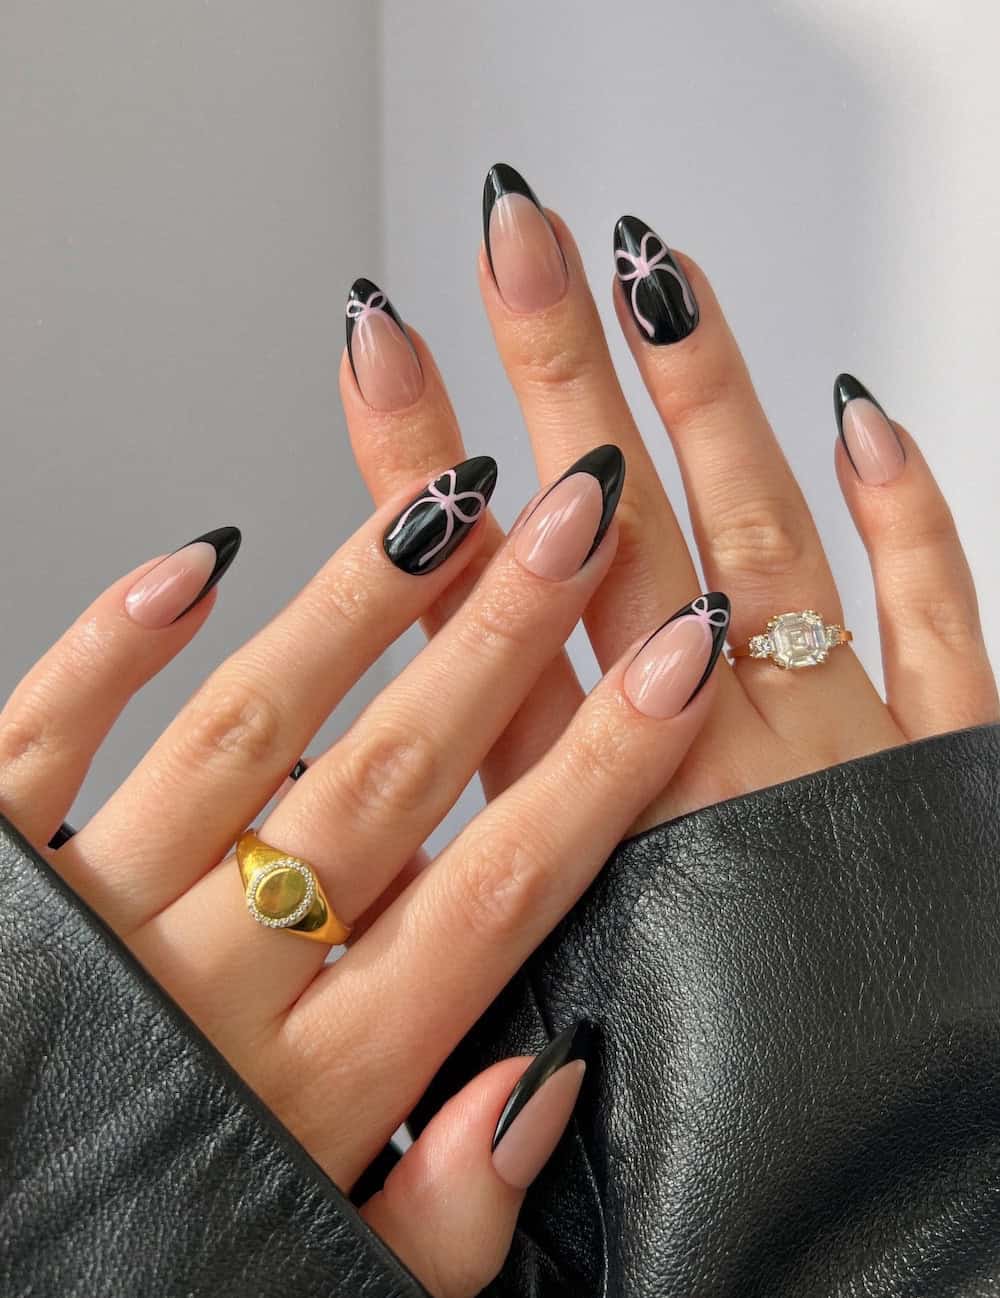 nude almond nails with black french tips and black accent nails with pink bow details